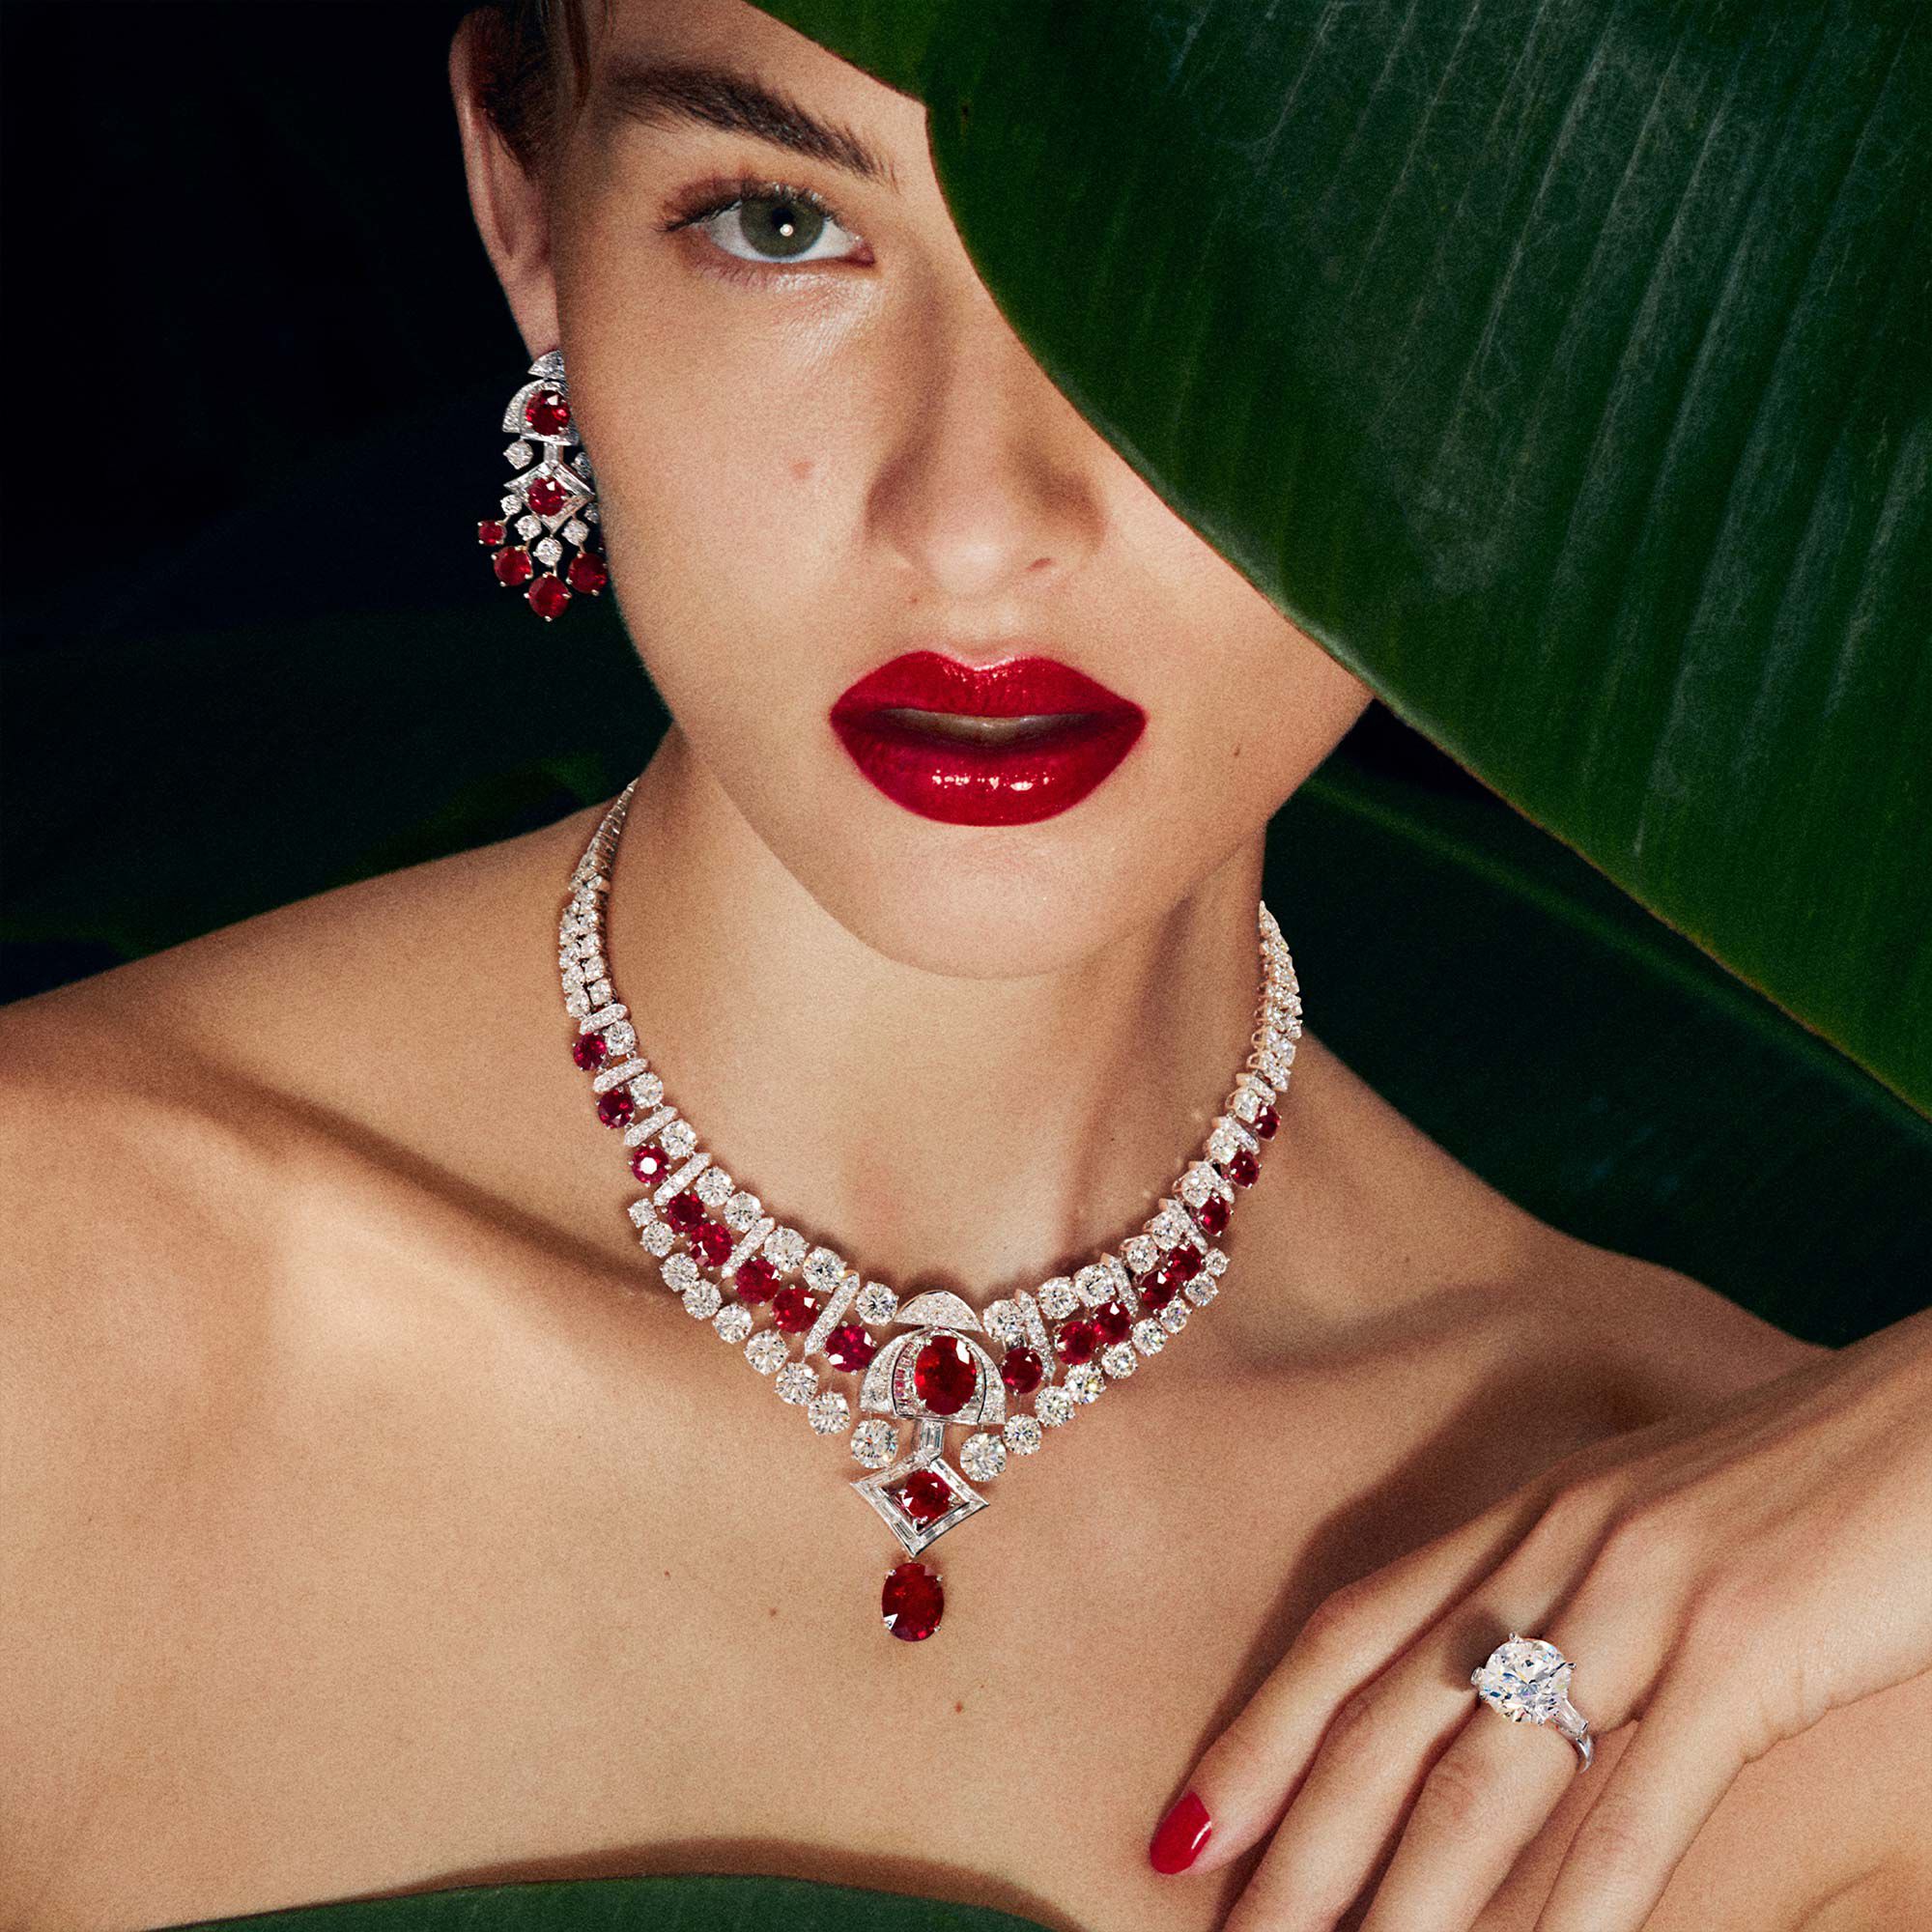 Model wears a Graff ruby and white diamond high jewellery necklace